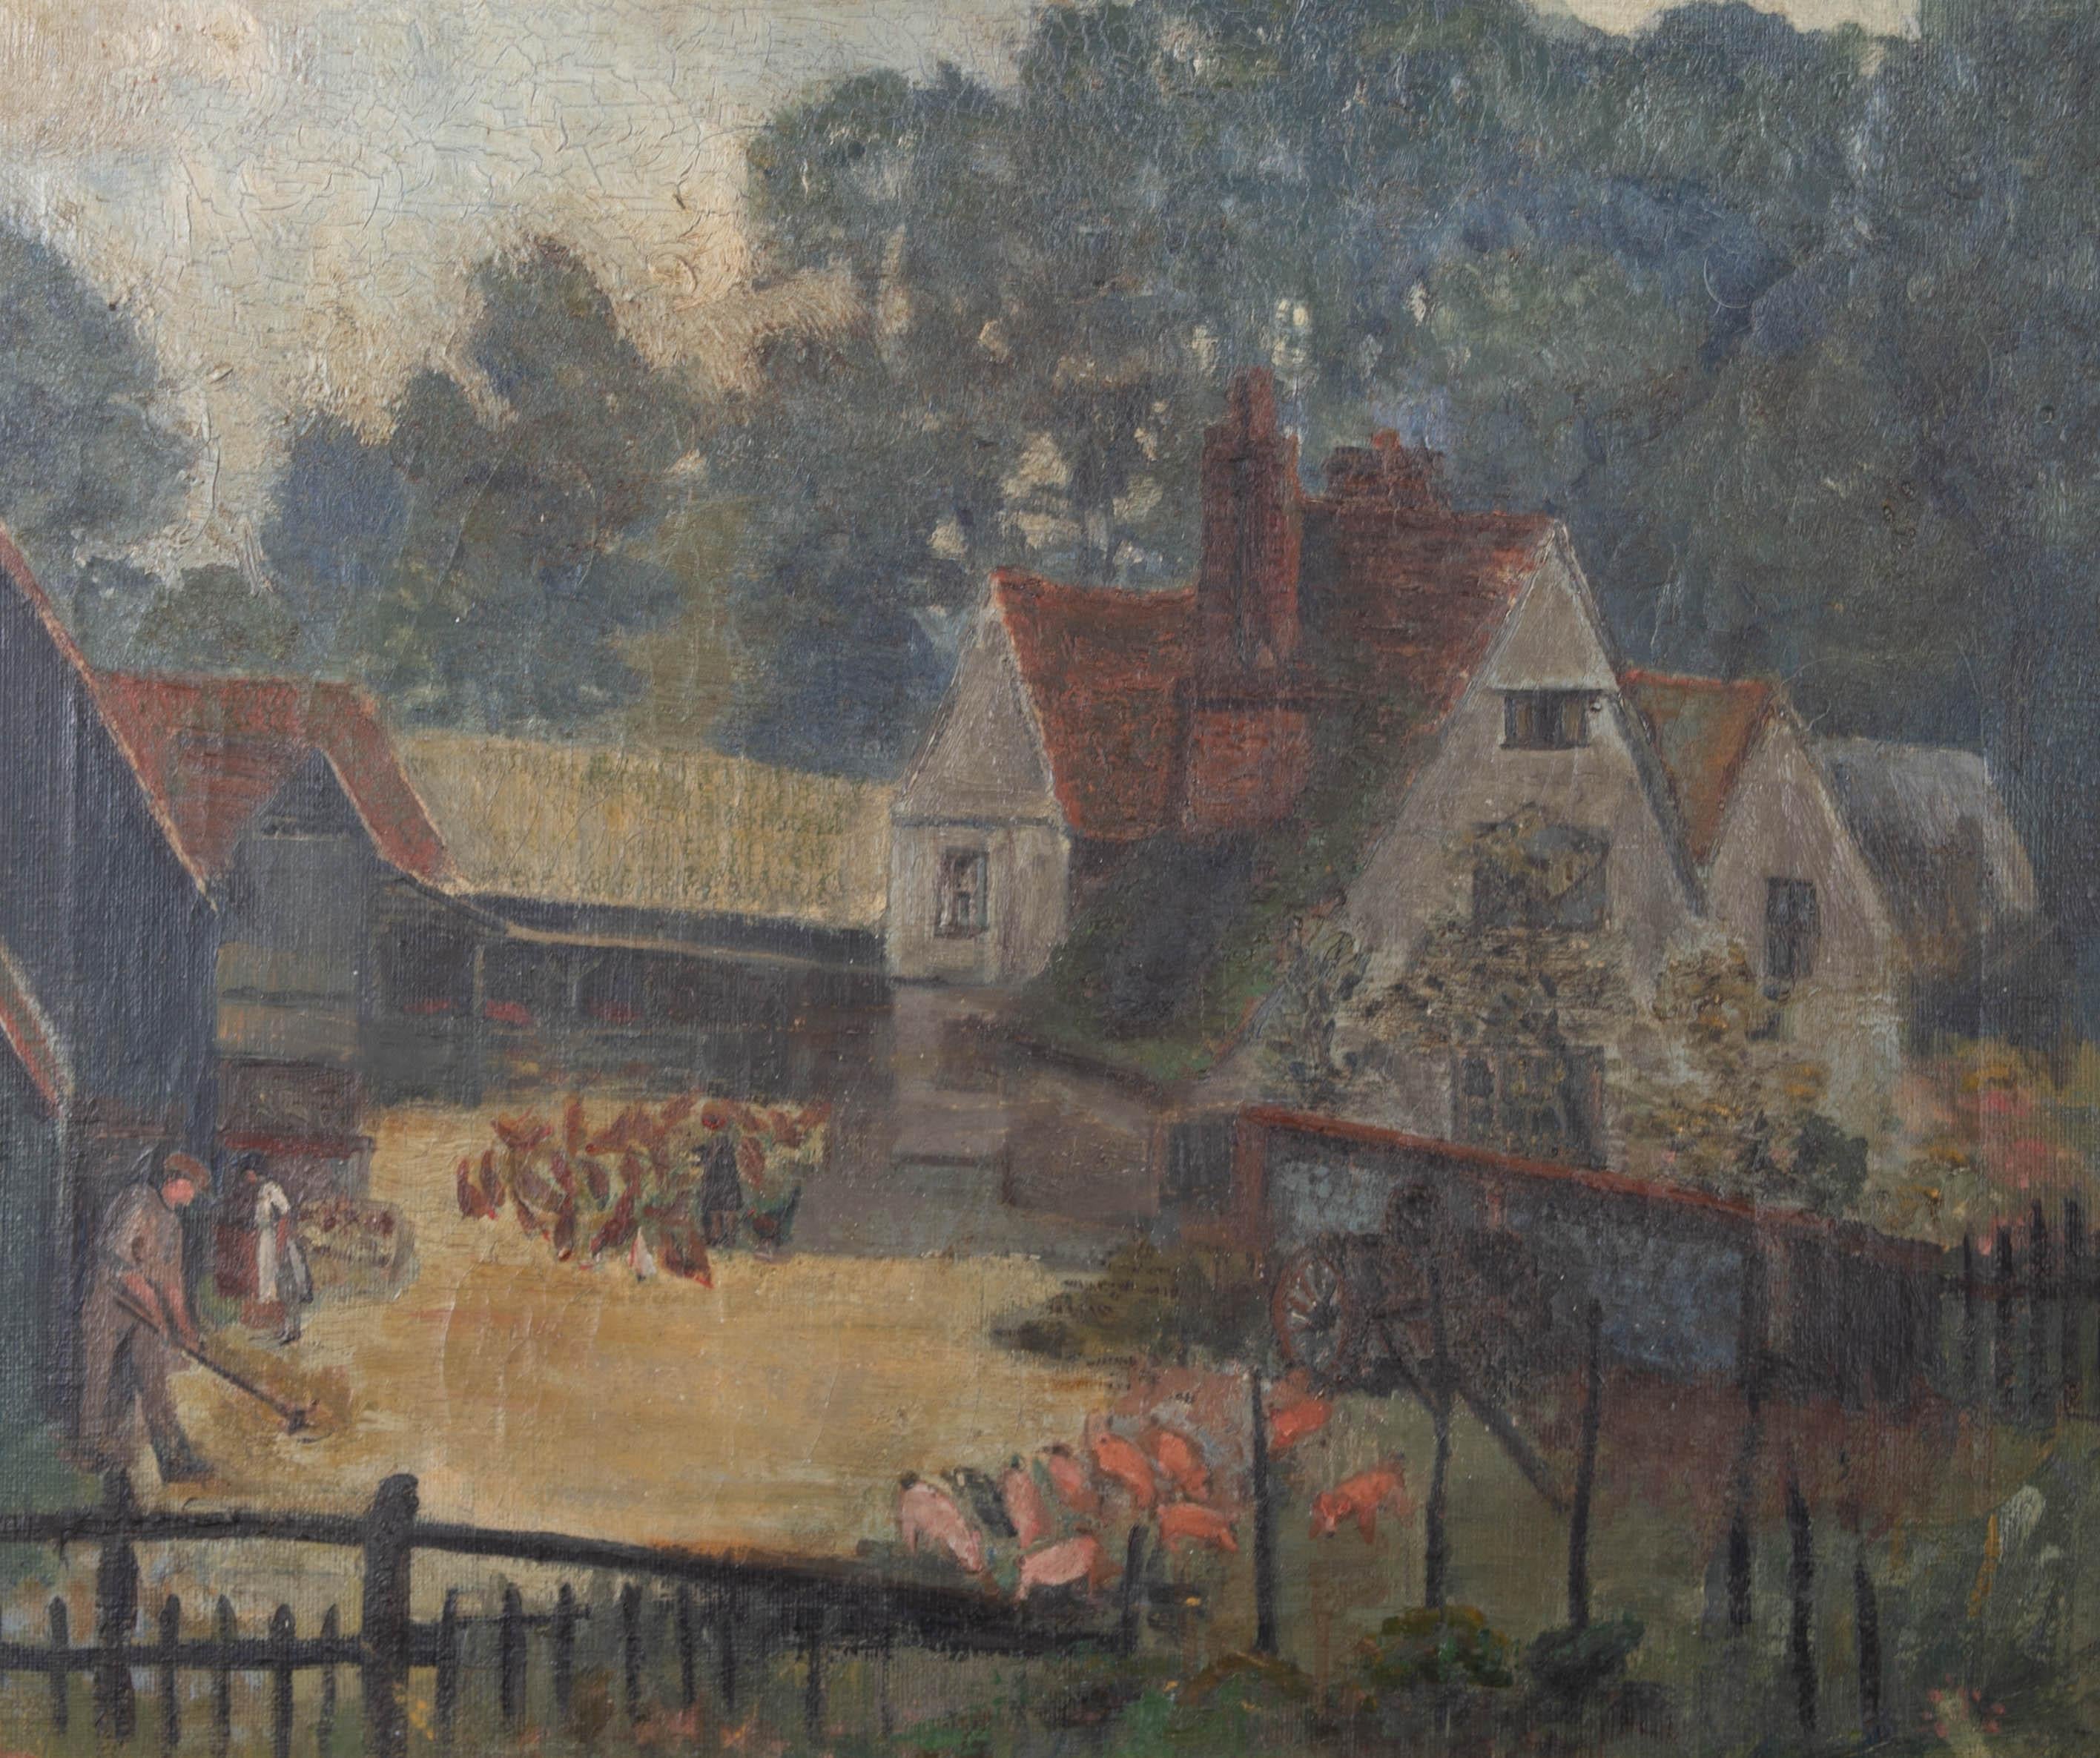 Unknown Landscape Painting - Naive Early 20th Century Oil - The Busy Farmyard